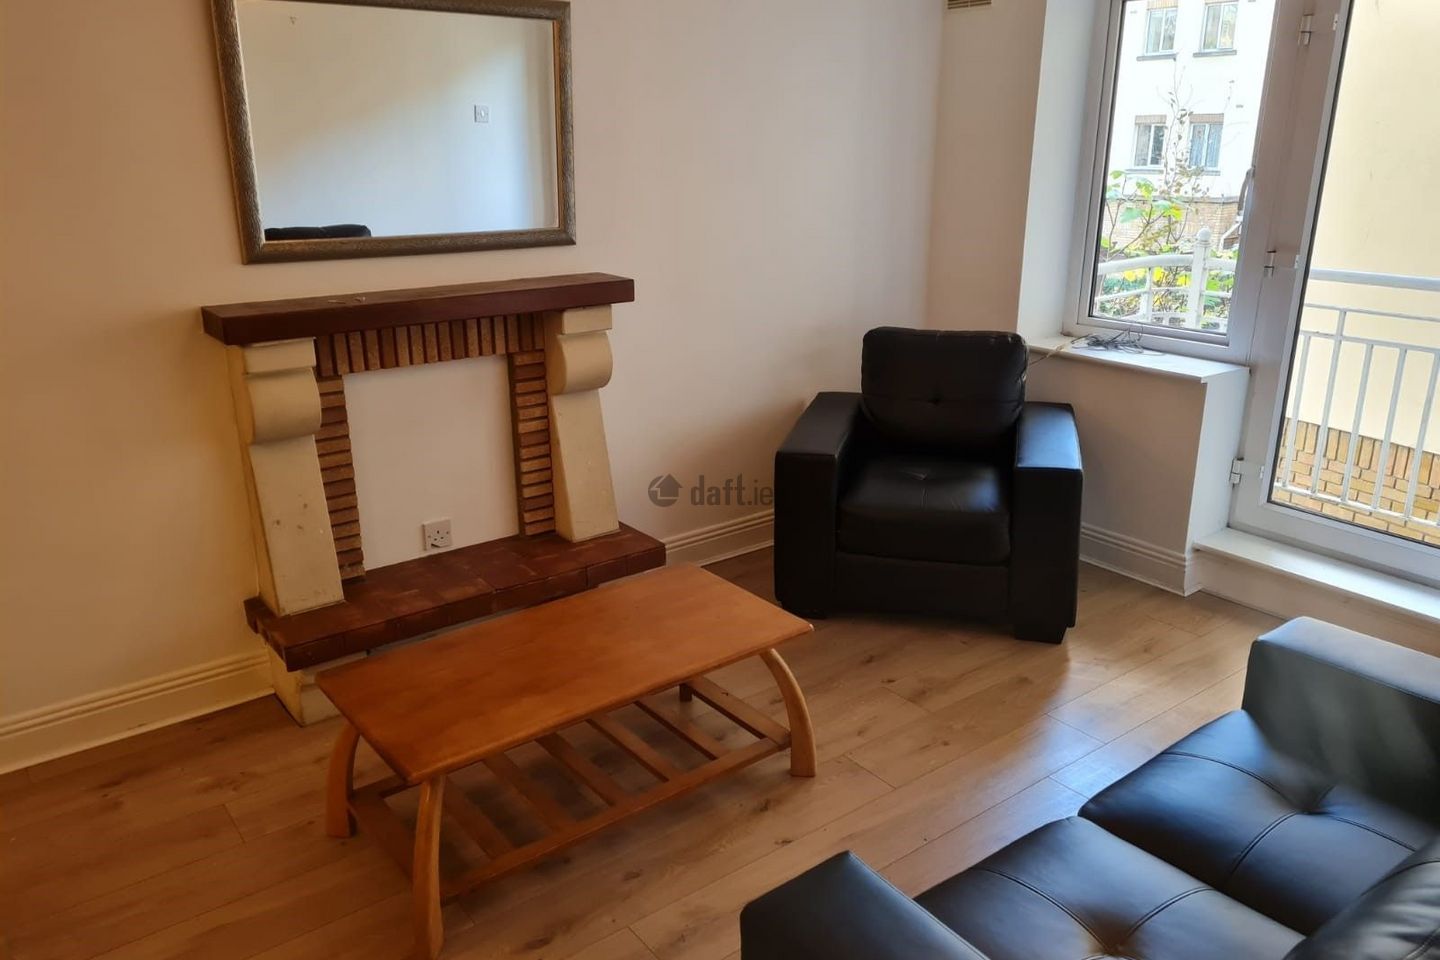 Room available in a shared apartment  - Bachelors Walk Apartments,Bachelors Walk,Dublin 1, Dublin City Centre